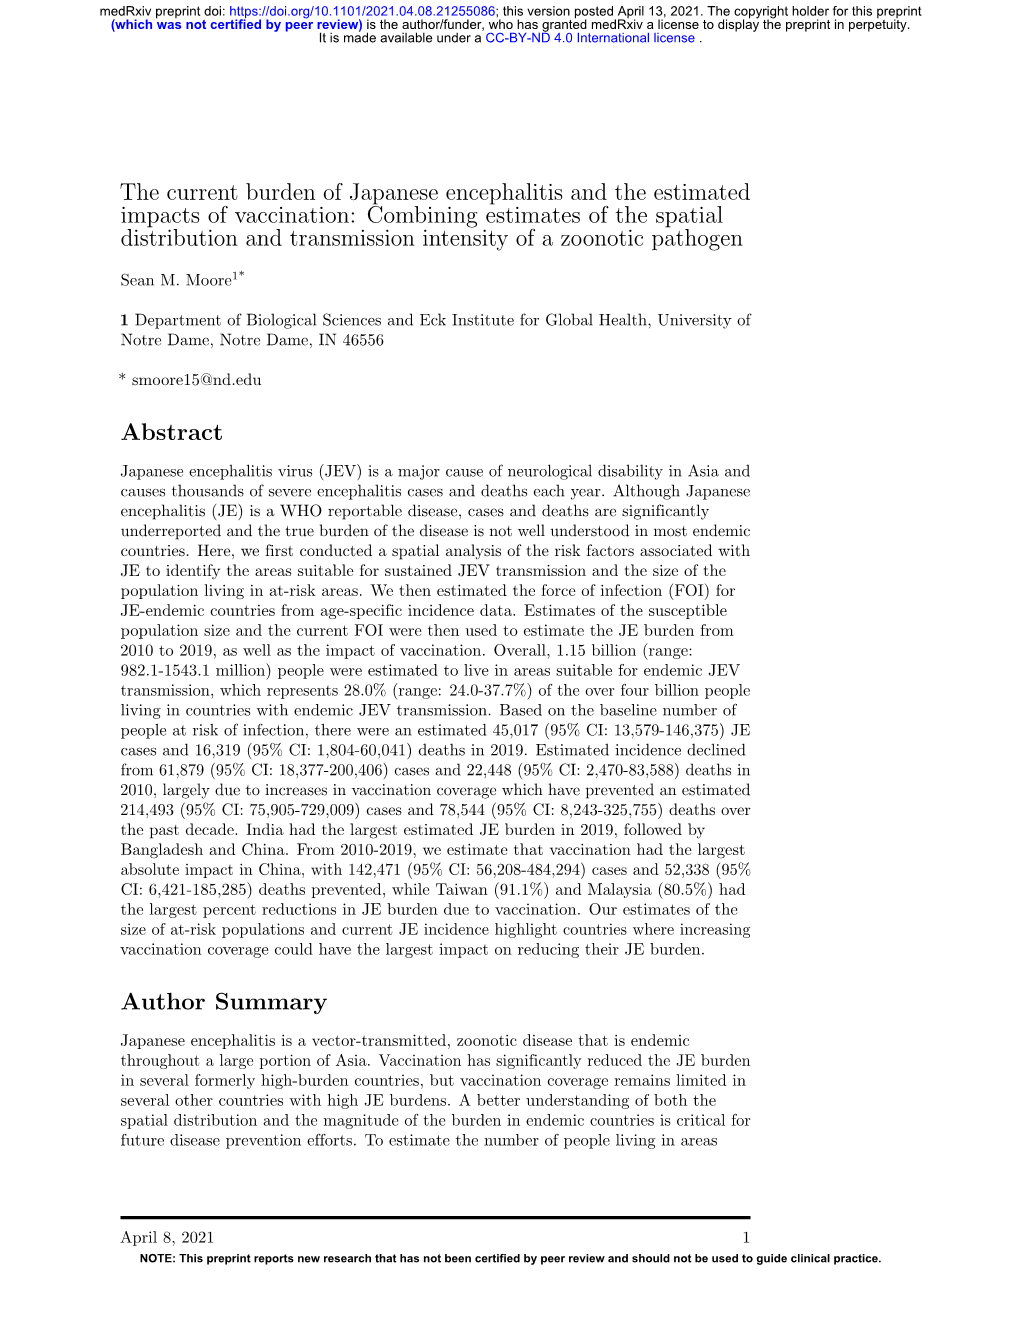 The Current Burden of Japanese Encephalitis and the Estimated